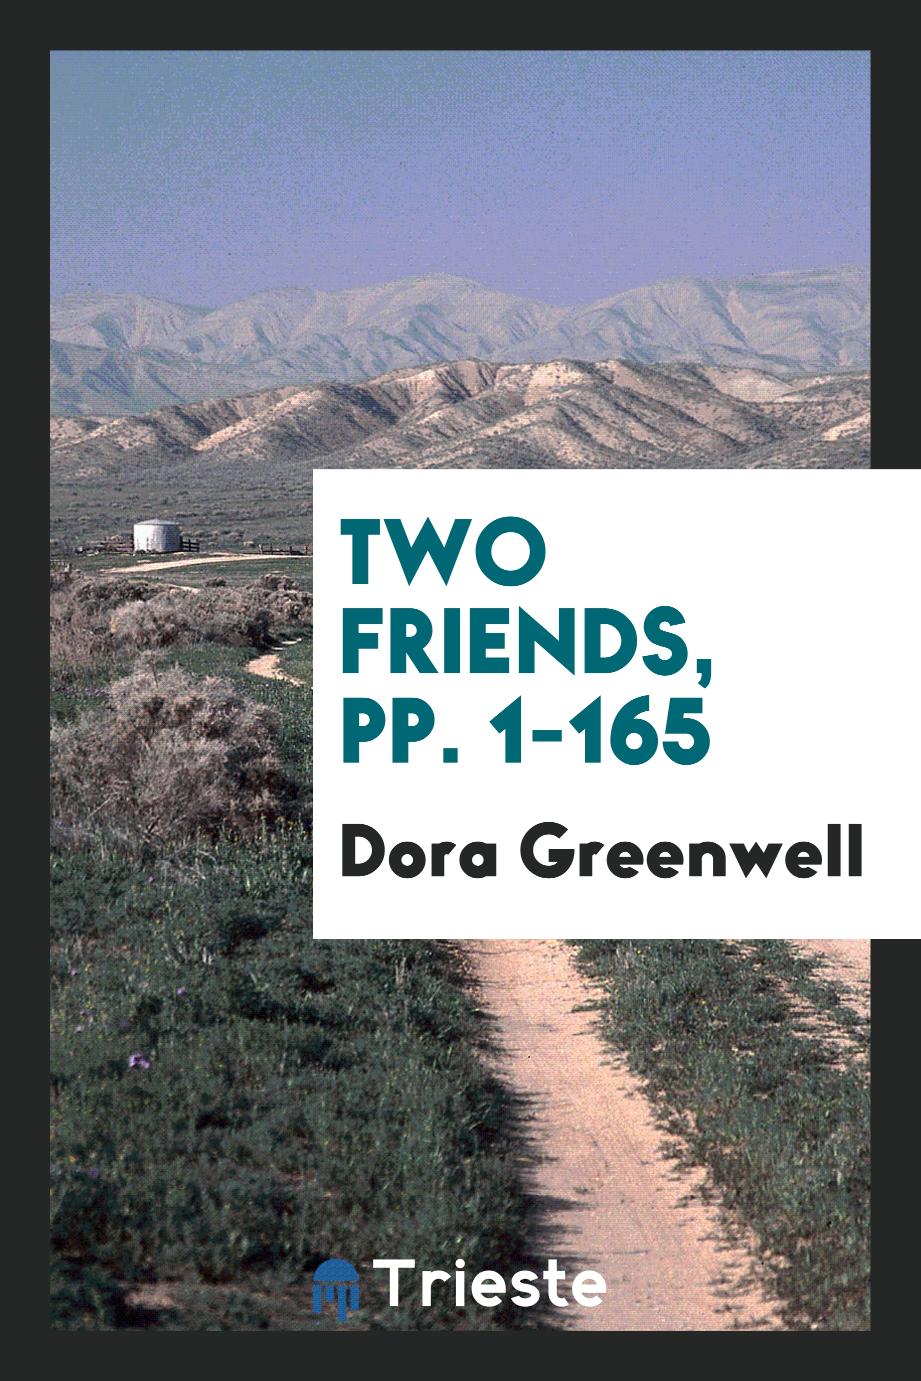 Two Friends, pp. 1-165